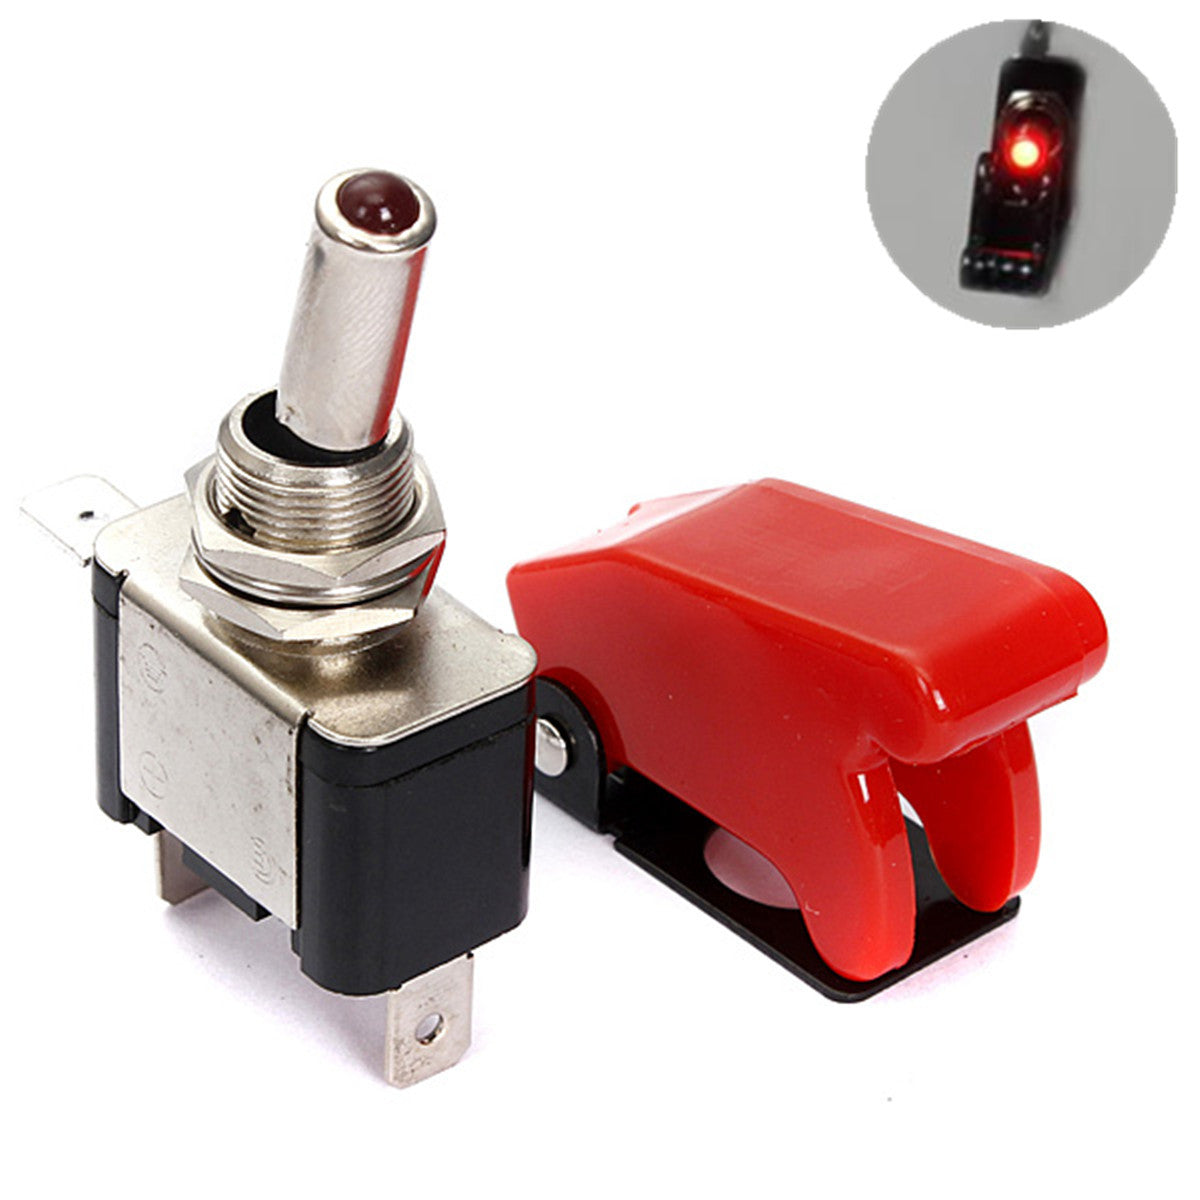 Firebrick Car SPST Toggle Rocker Switch Control LED Indicator Light 12V 20A On Off Switch with Cover